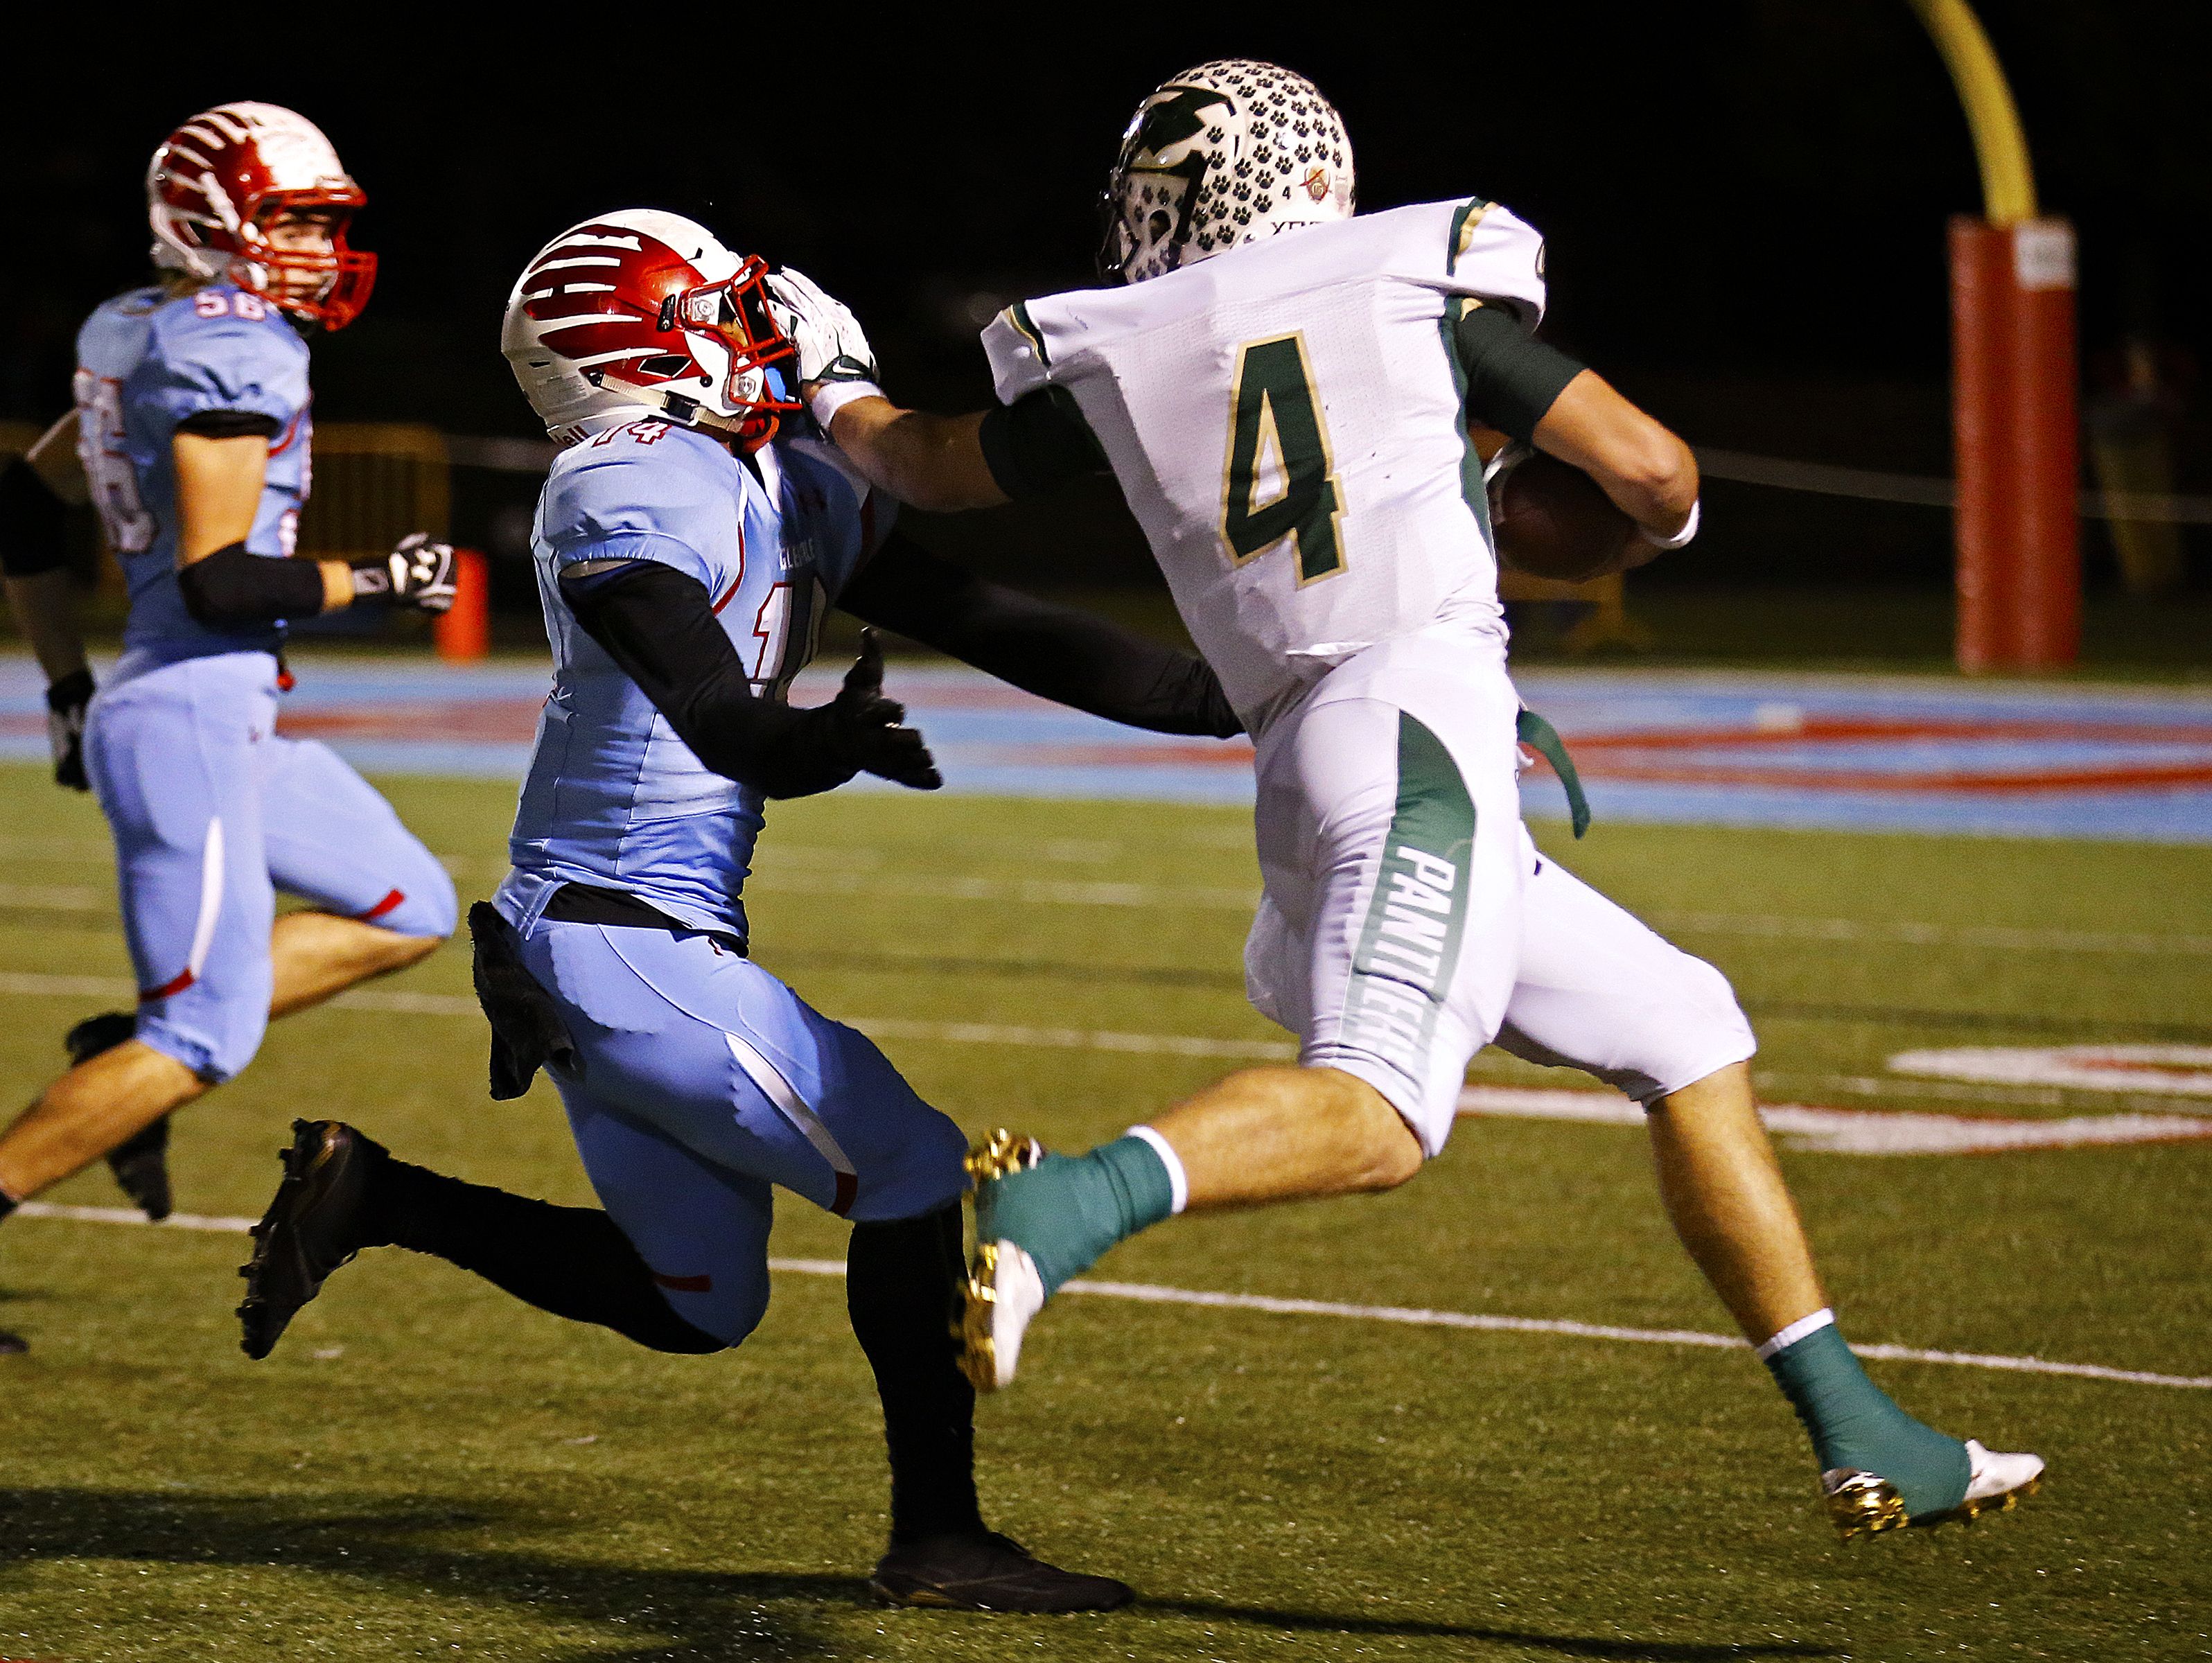 Ft. Zumwalt North High School quarterback Cade Brister (4) stiff arms Falcons defensive back Myles Sith (14) during first quarter action of the playoff game between Glendale High School and Ft. Zumwalt North High School held at Lowe Stadium in Springfield, Mo. on Nov. 11, 2016.